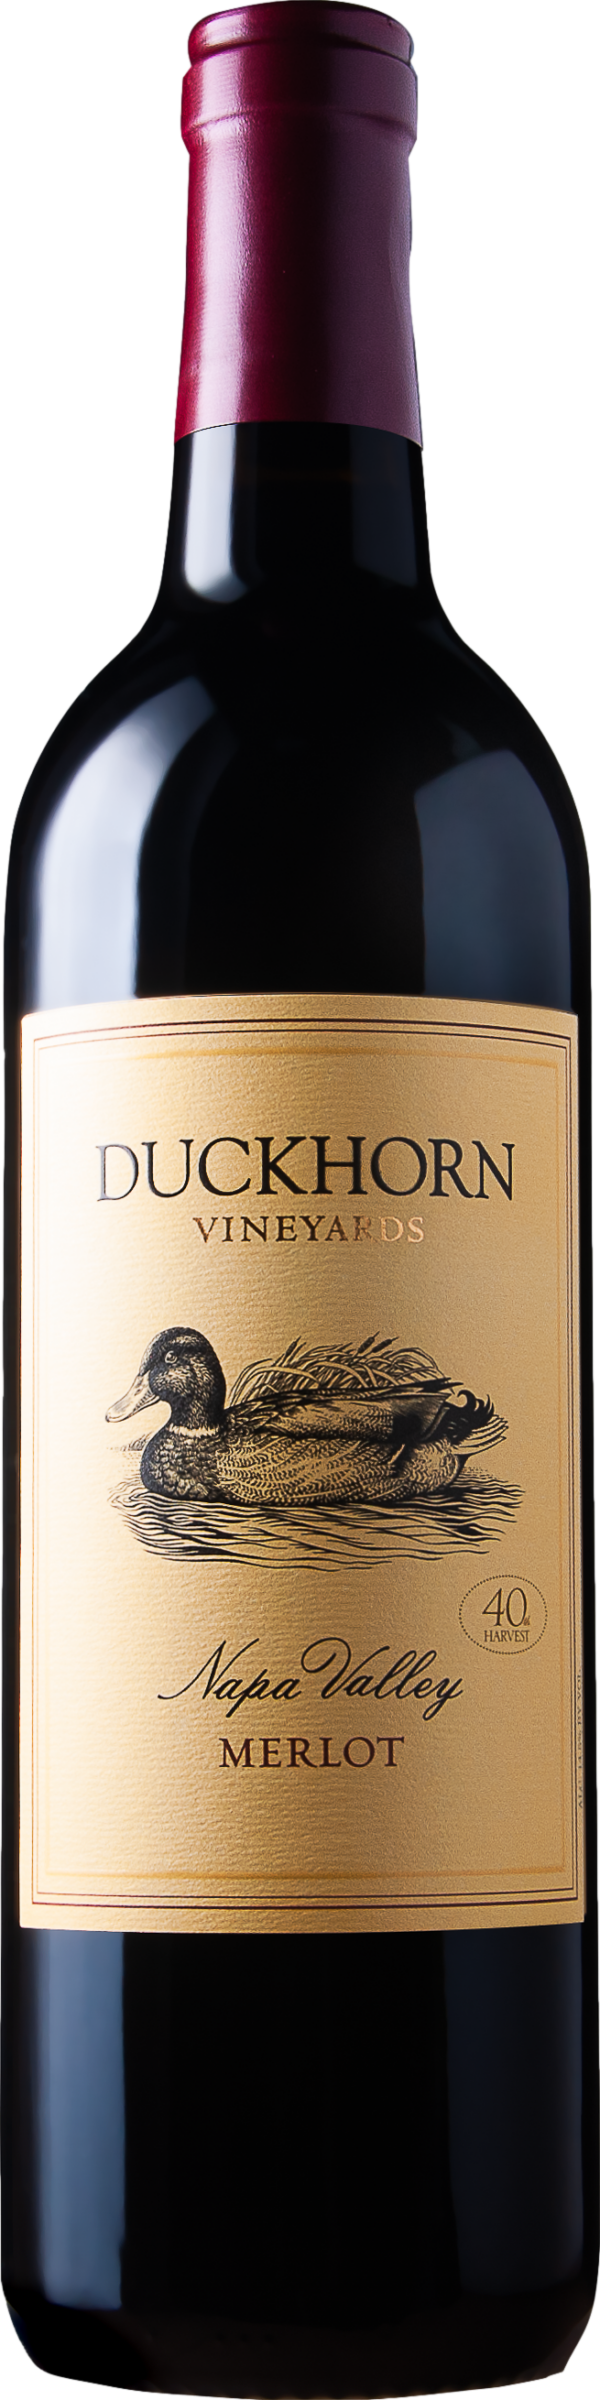 Product image of Duckhorn Napa Valley Merlot 2020 from 8wines